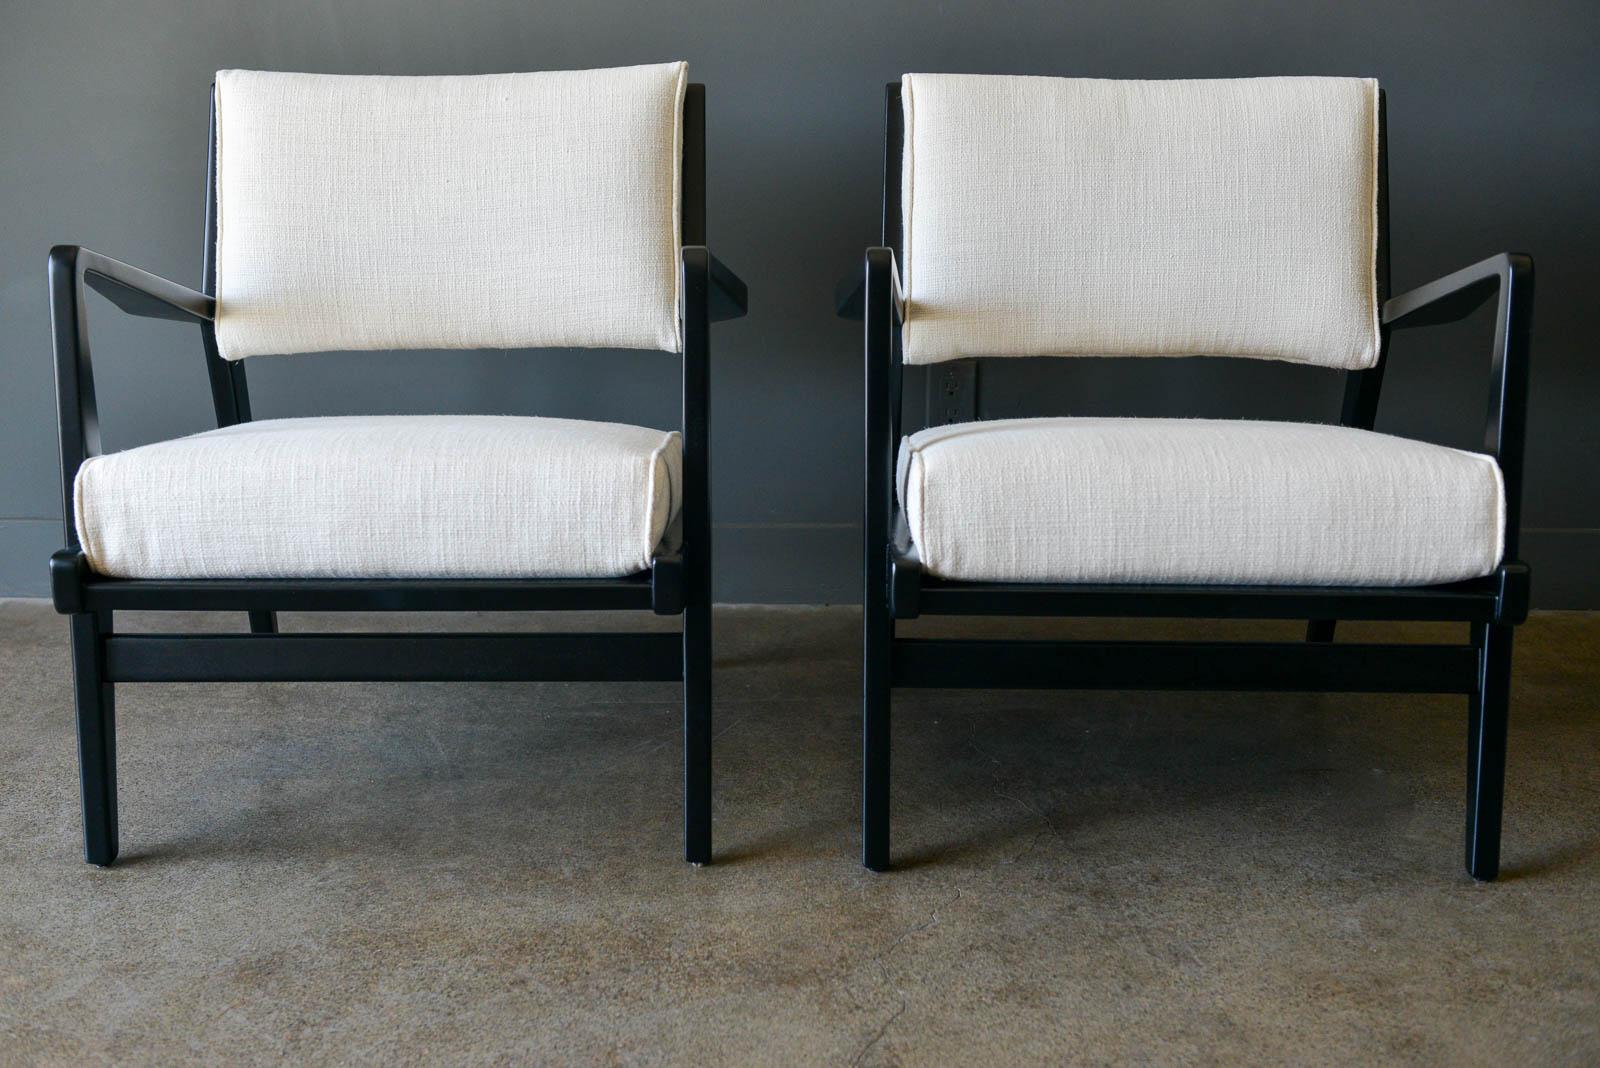 Pair of ebonized lounge chairs by Jens Risom, ca. 1965. Newly refinished and reupholstered in beautiful easy care oyster colored tweed, these Classic chairs are very comfortable with solid wood seats under the cushions and sloping sculpted arms.